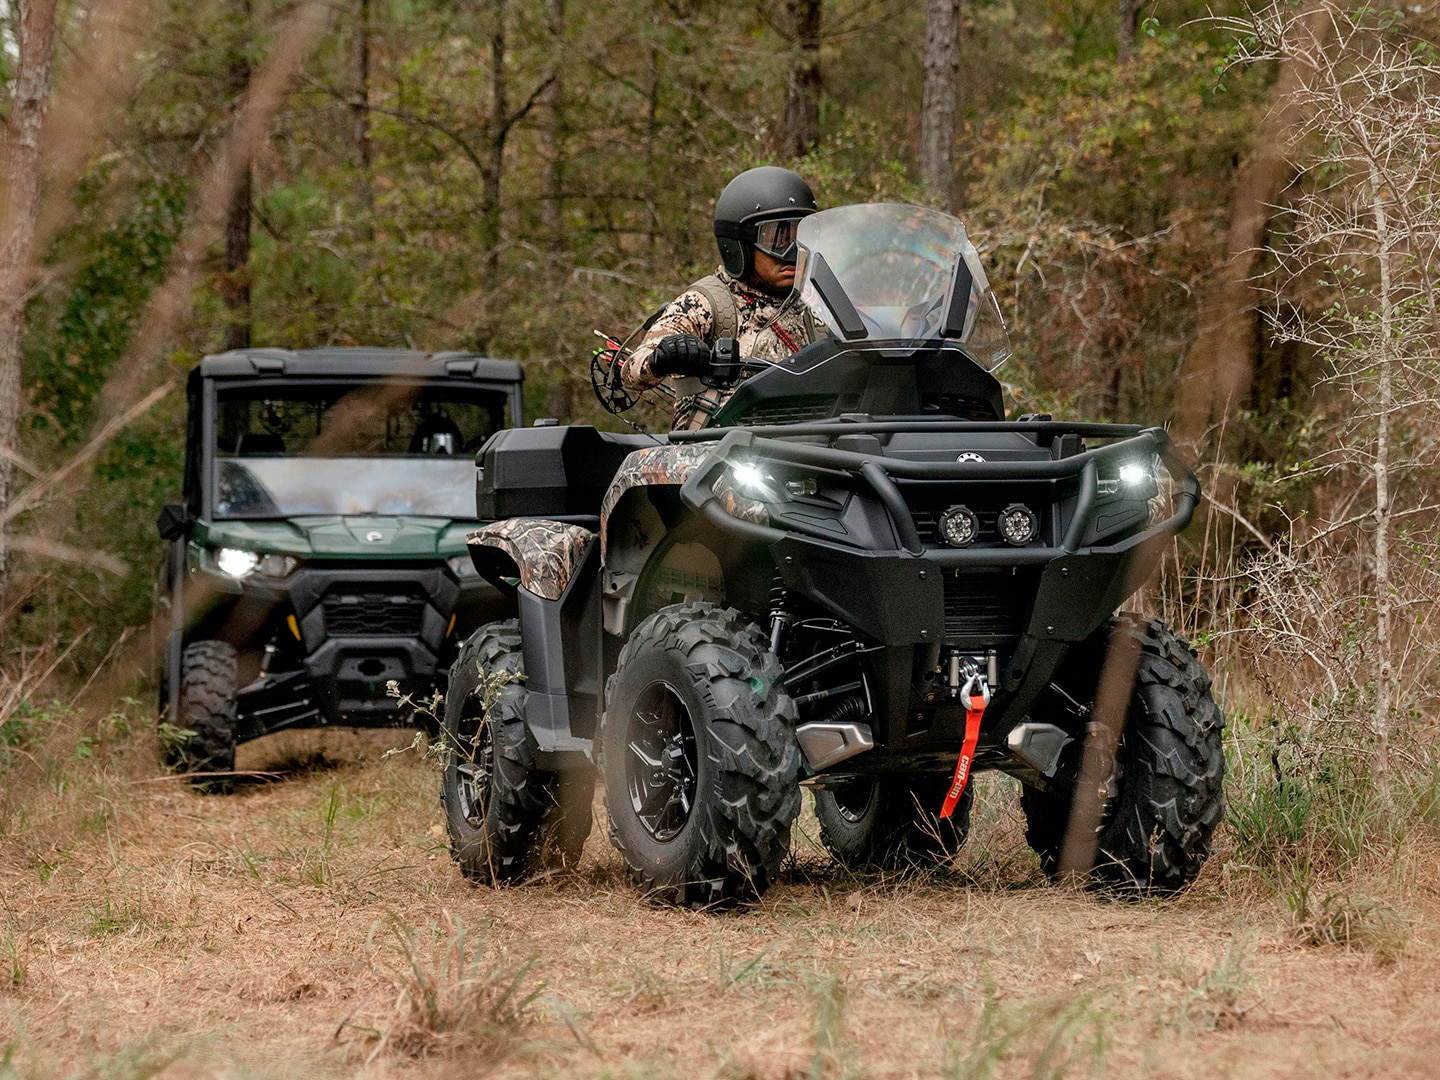 Can-Am Outlander ATV followed by a Defender side-by-side vehicle